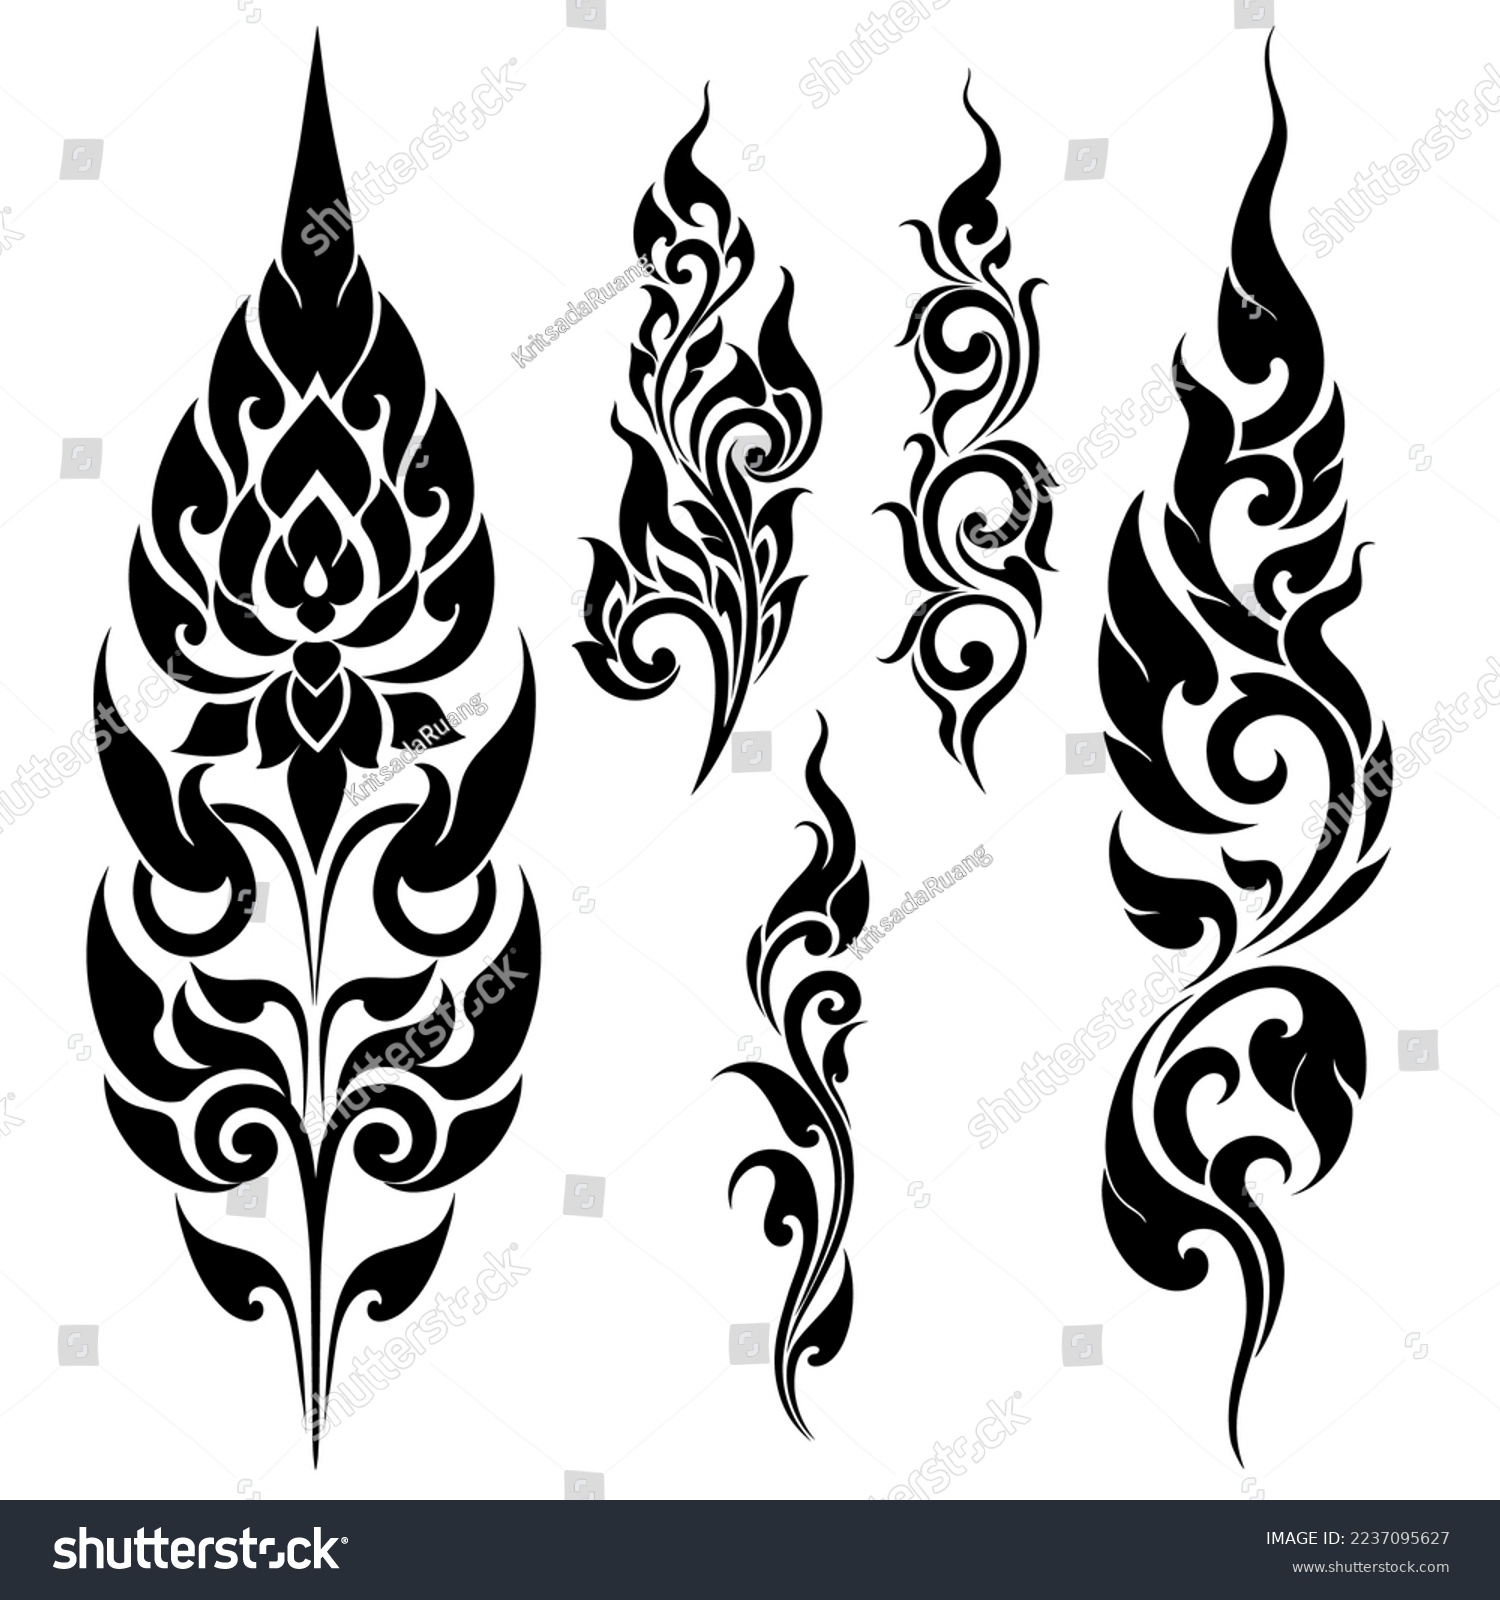 SVG of Thaiart or Lai Thai : Unique and characteristic to Thailand is the Thai art pattern. This work is excellent if you're looking to offer something that demonstrates Thainess. svg